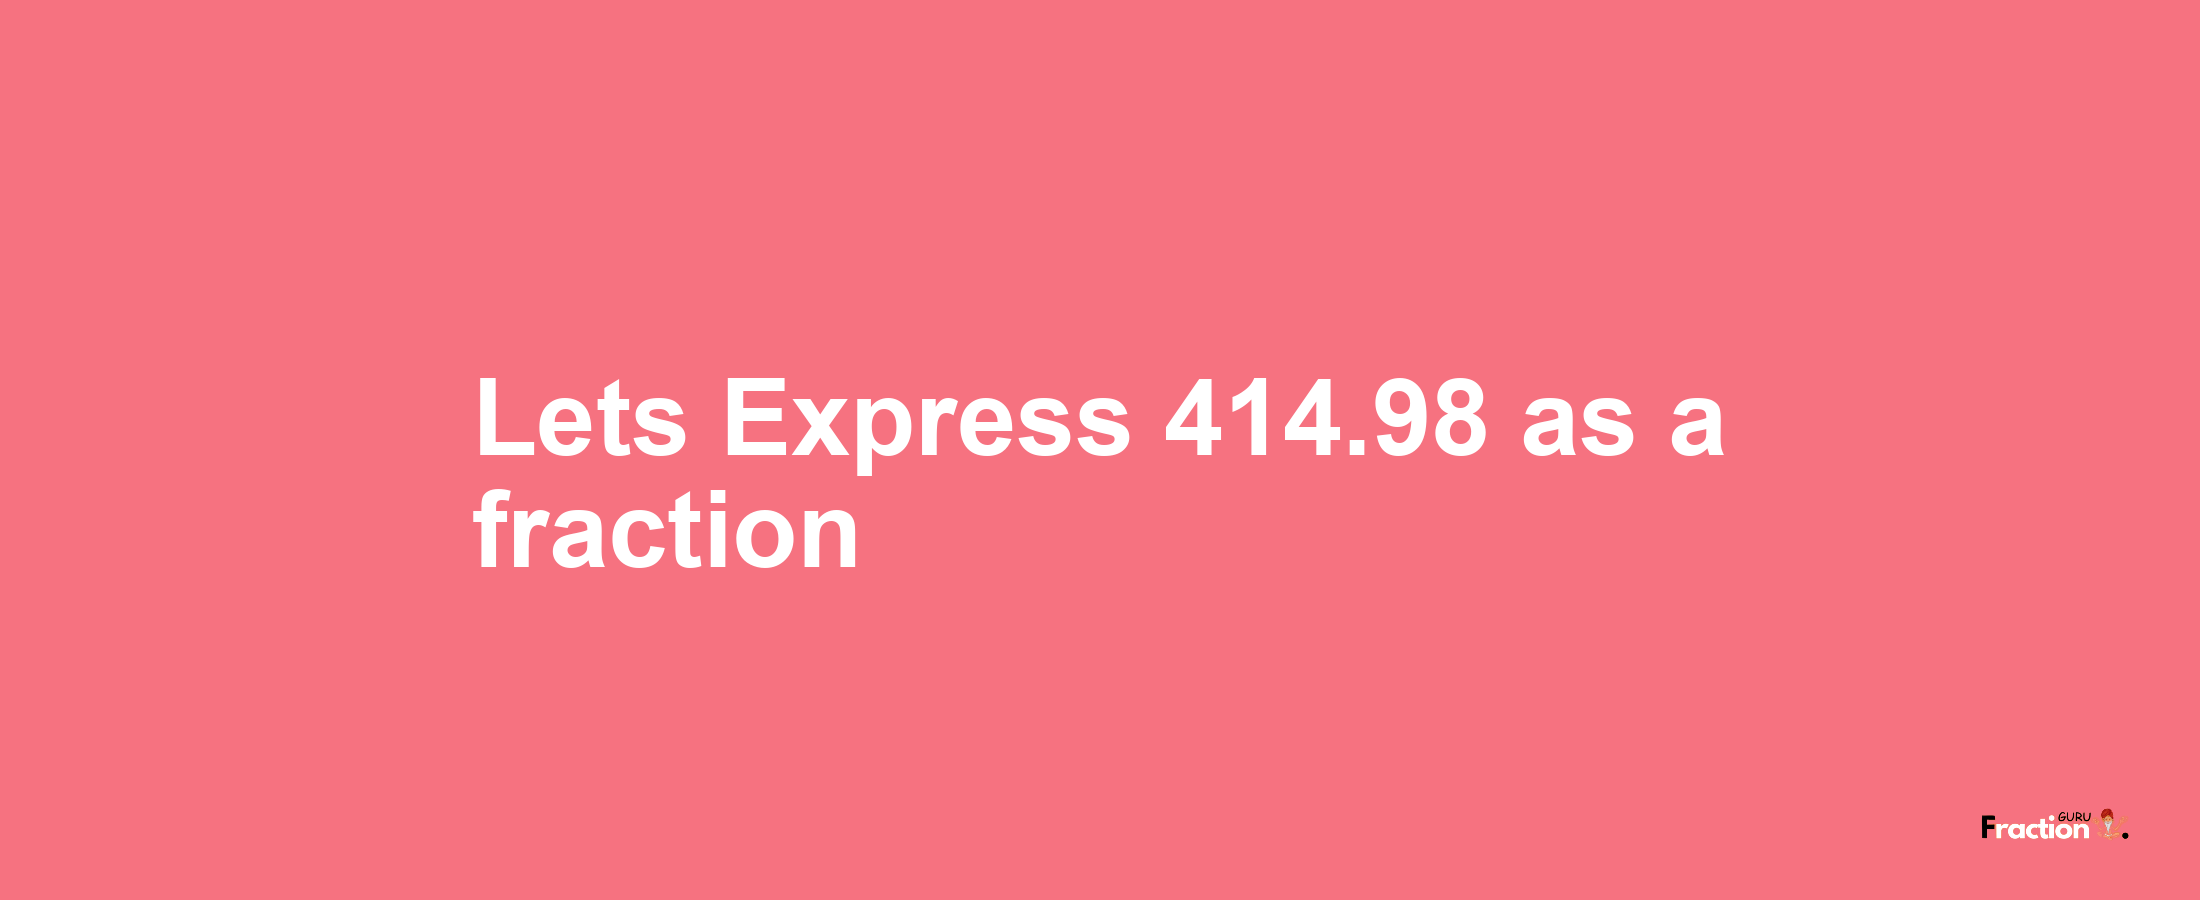 Lets Express 414.98 as afraction